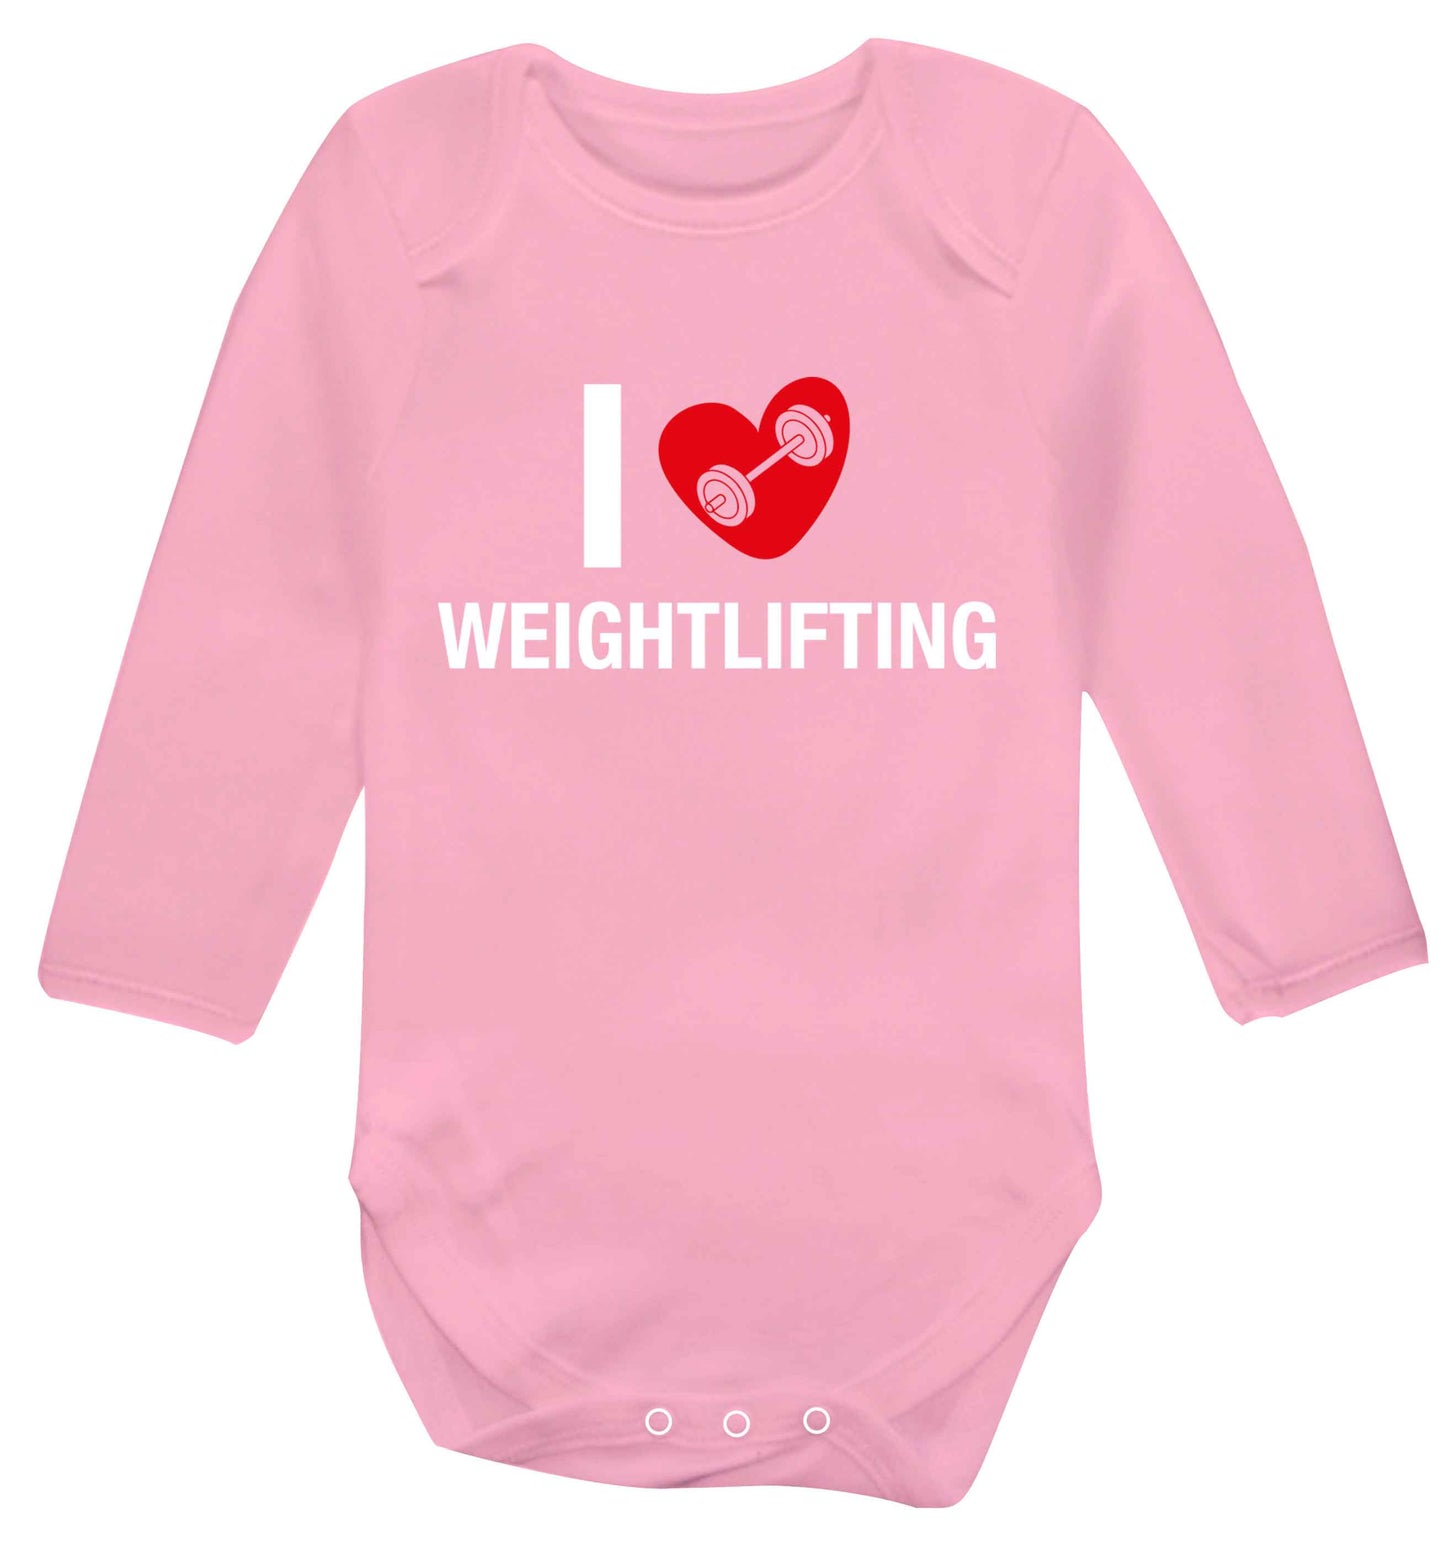 I love weightlifting Baby Vest long sleeved pale pink 6-12 months